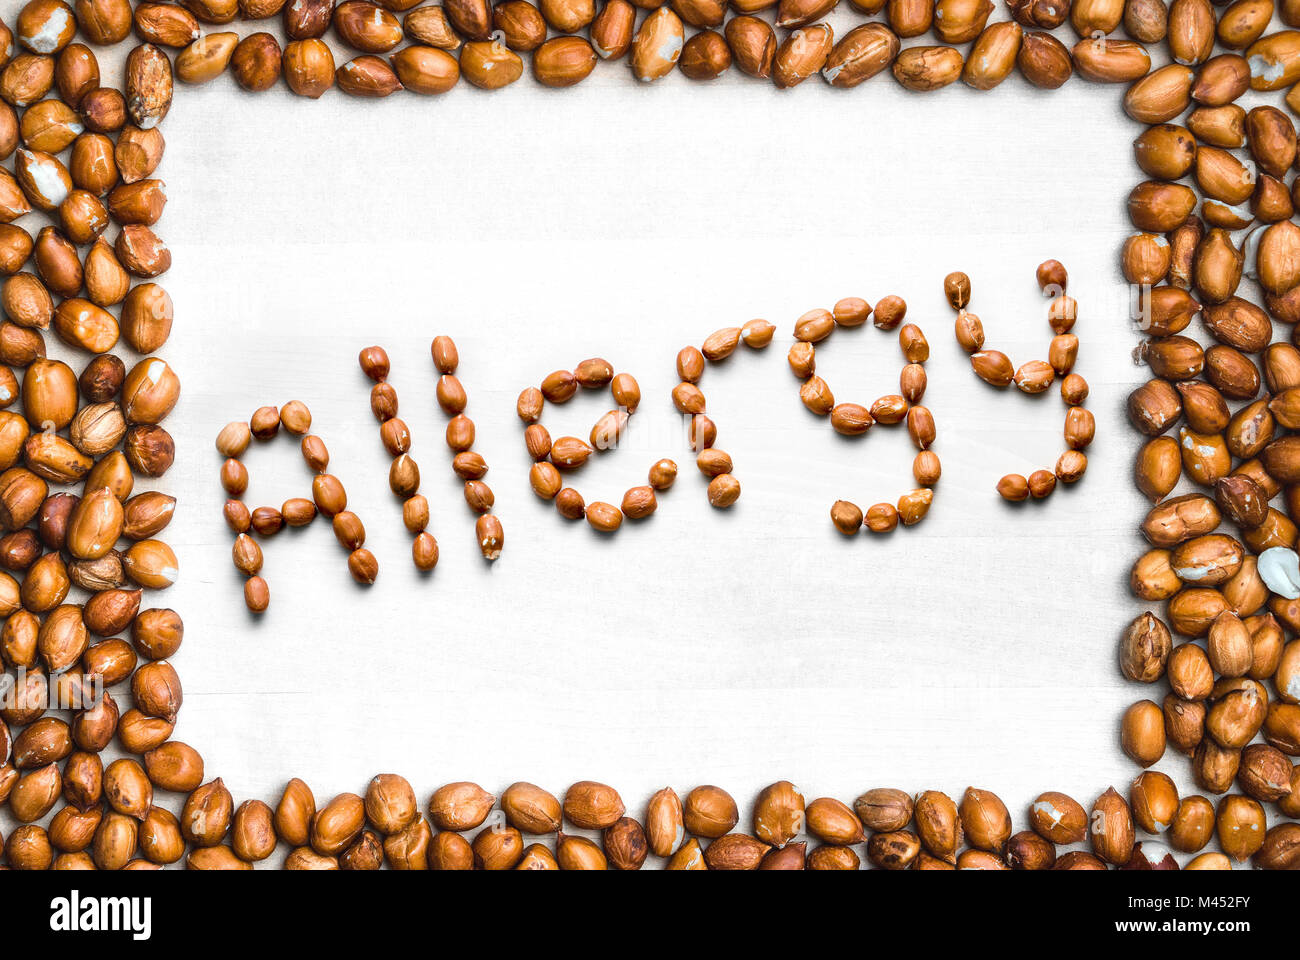 Allergy written with peanuts and surrounded with nut frame. Word and text made from nuts. Groundnuts on white wooden table or board with border. Stock Photo